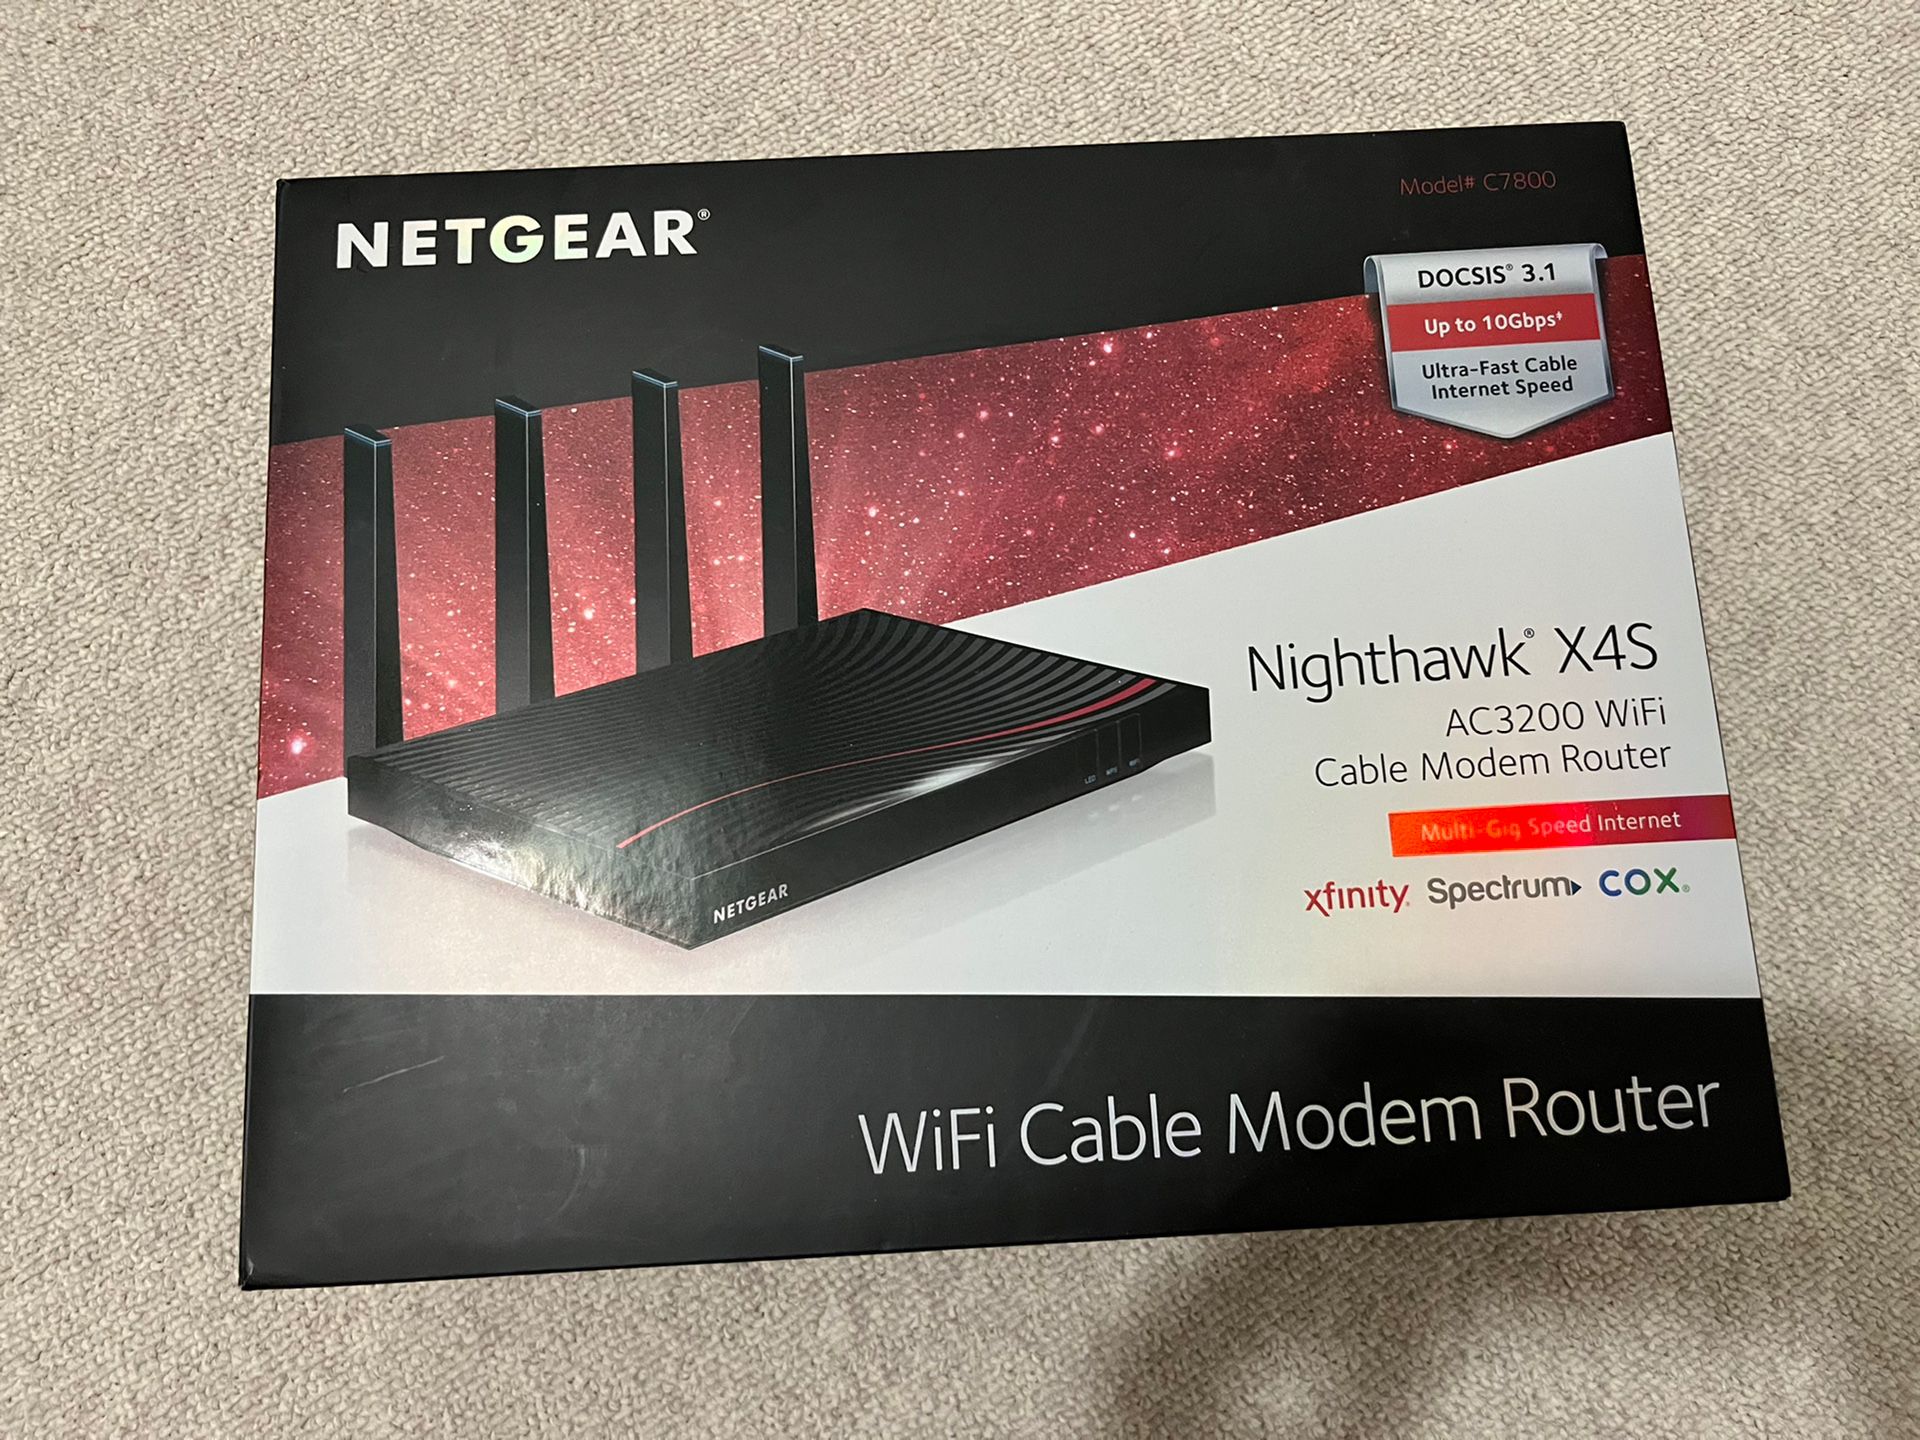 Nighthawk X4S Cable Modem Router